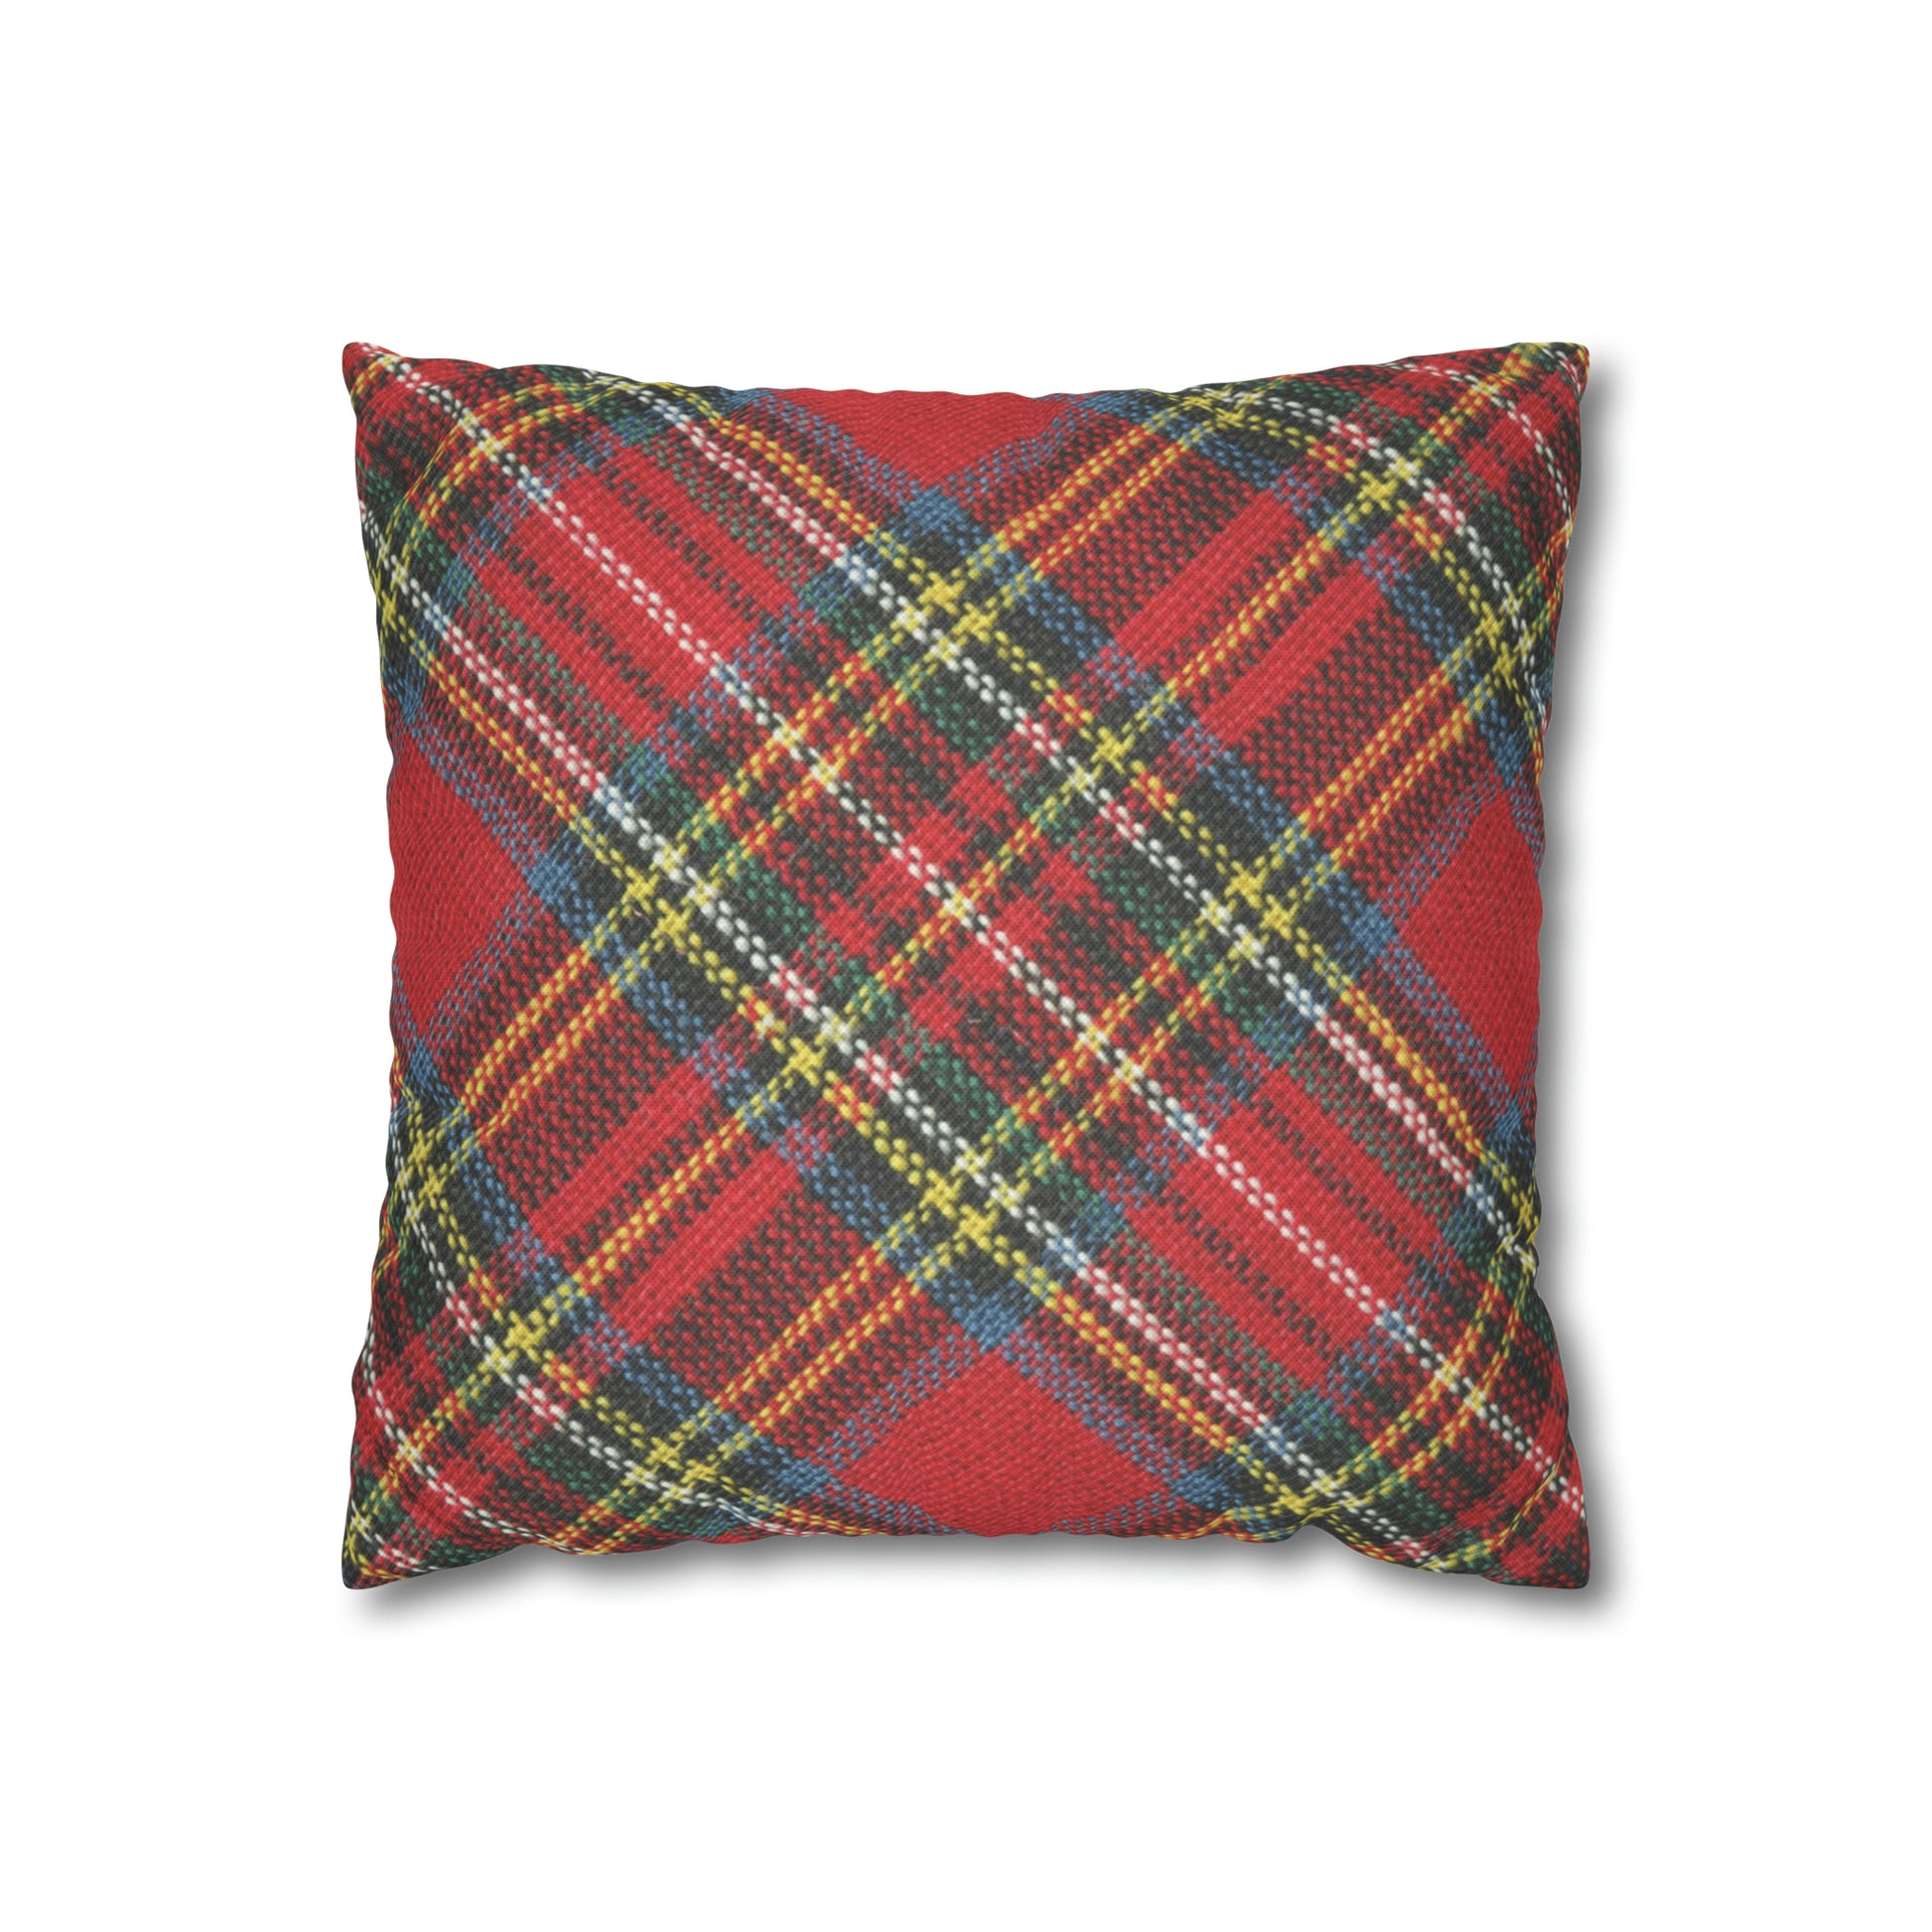 An American-made Printify red-plaid pillow case on a white background.